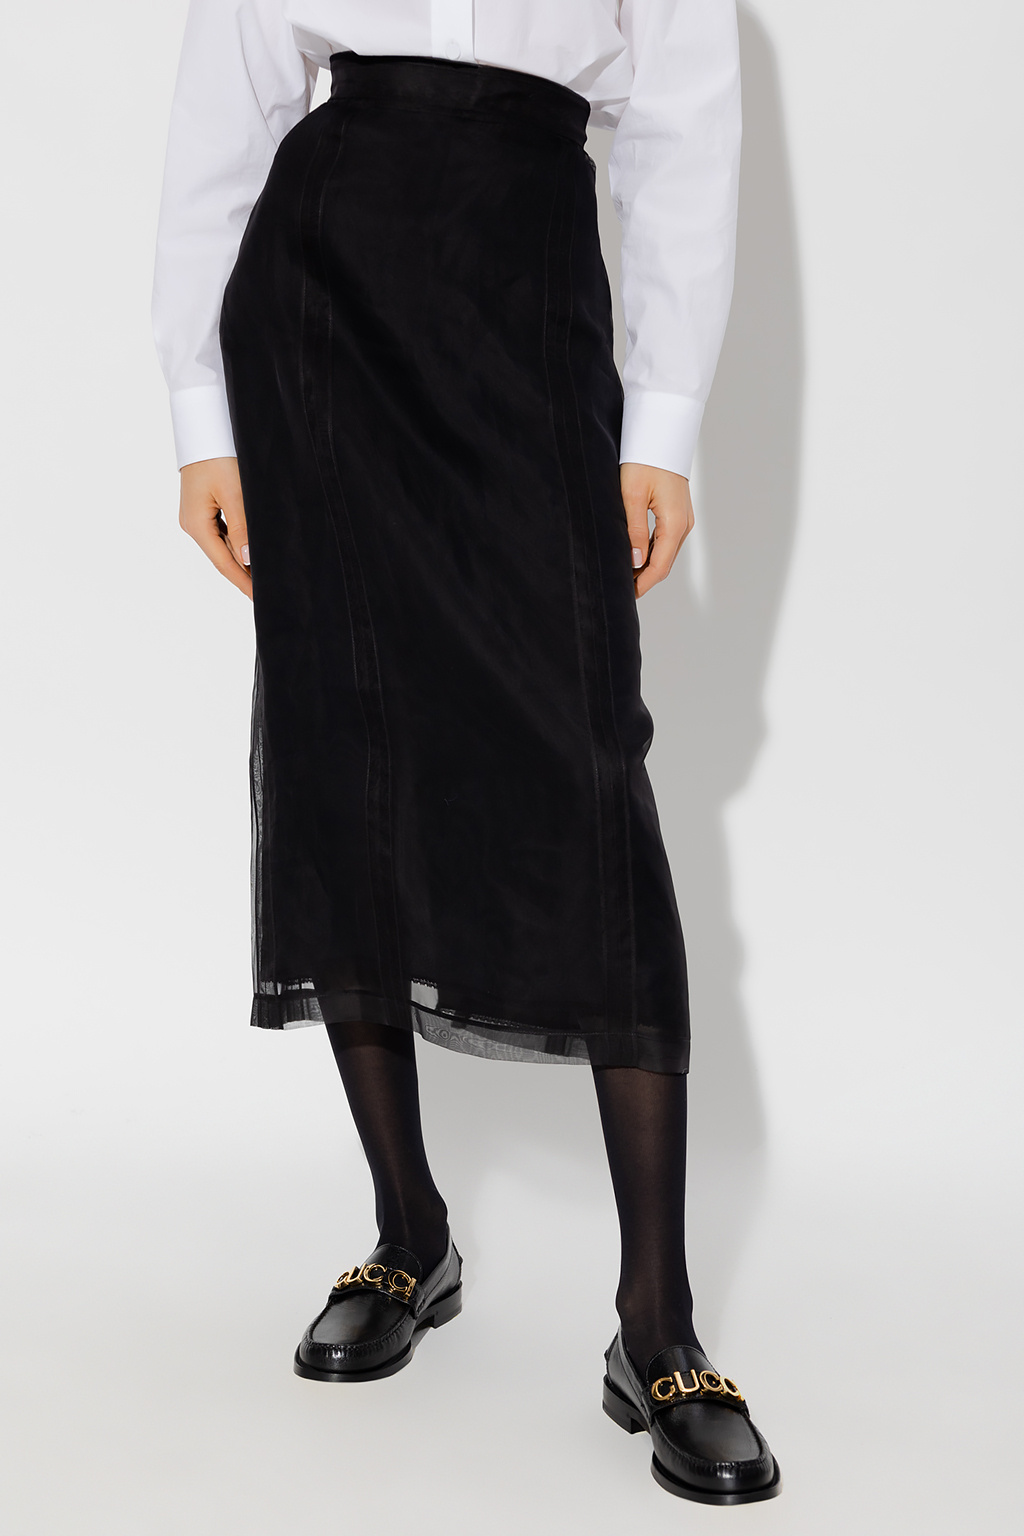 Gucci Two-layered skirt